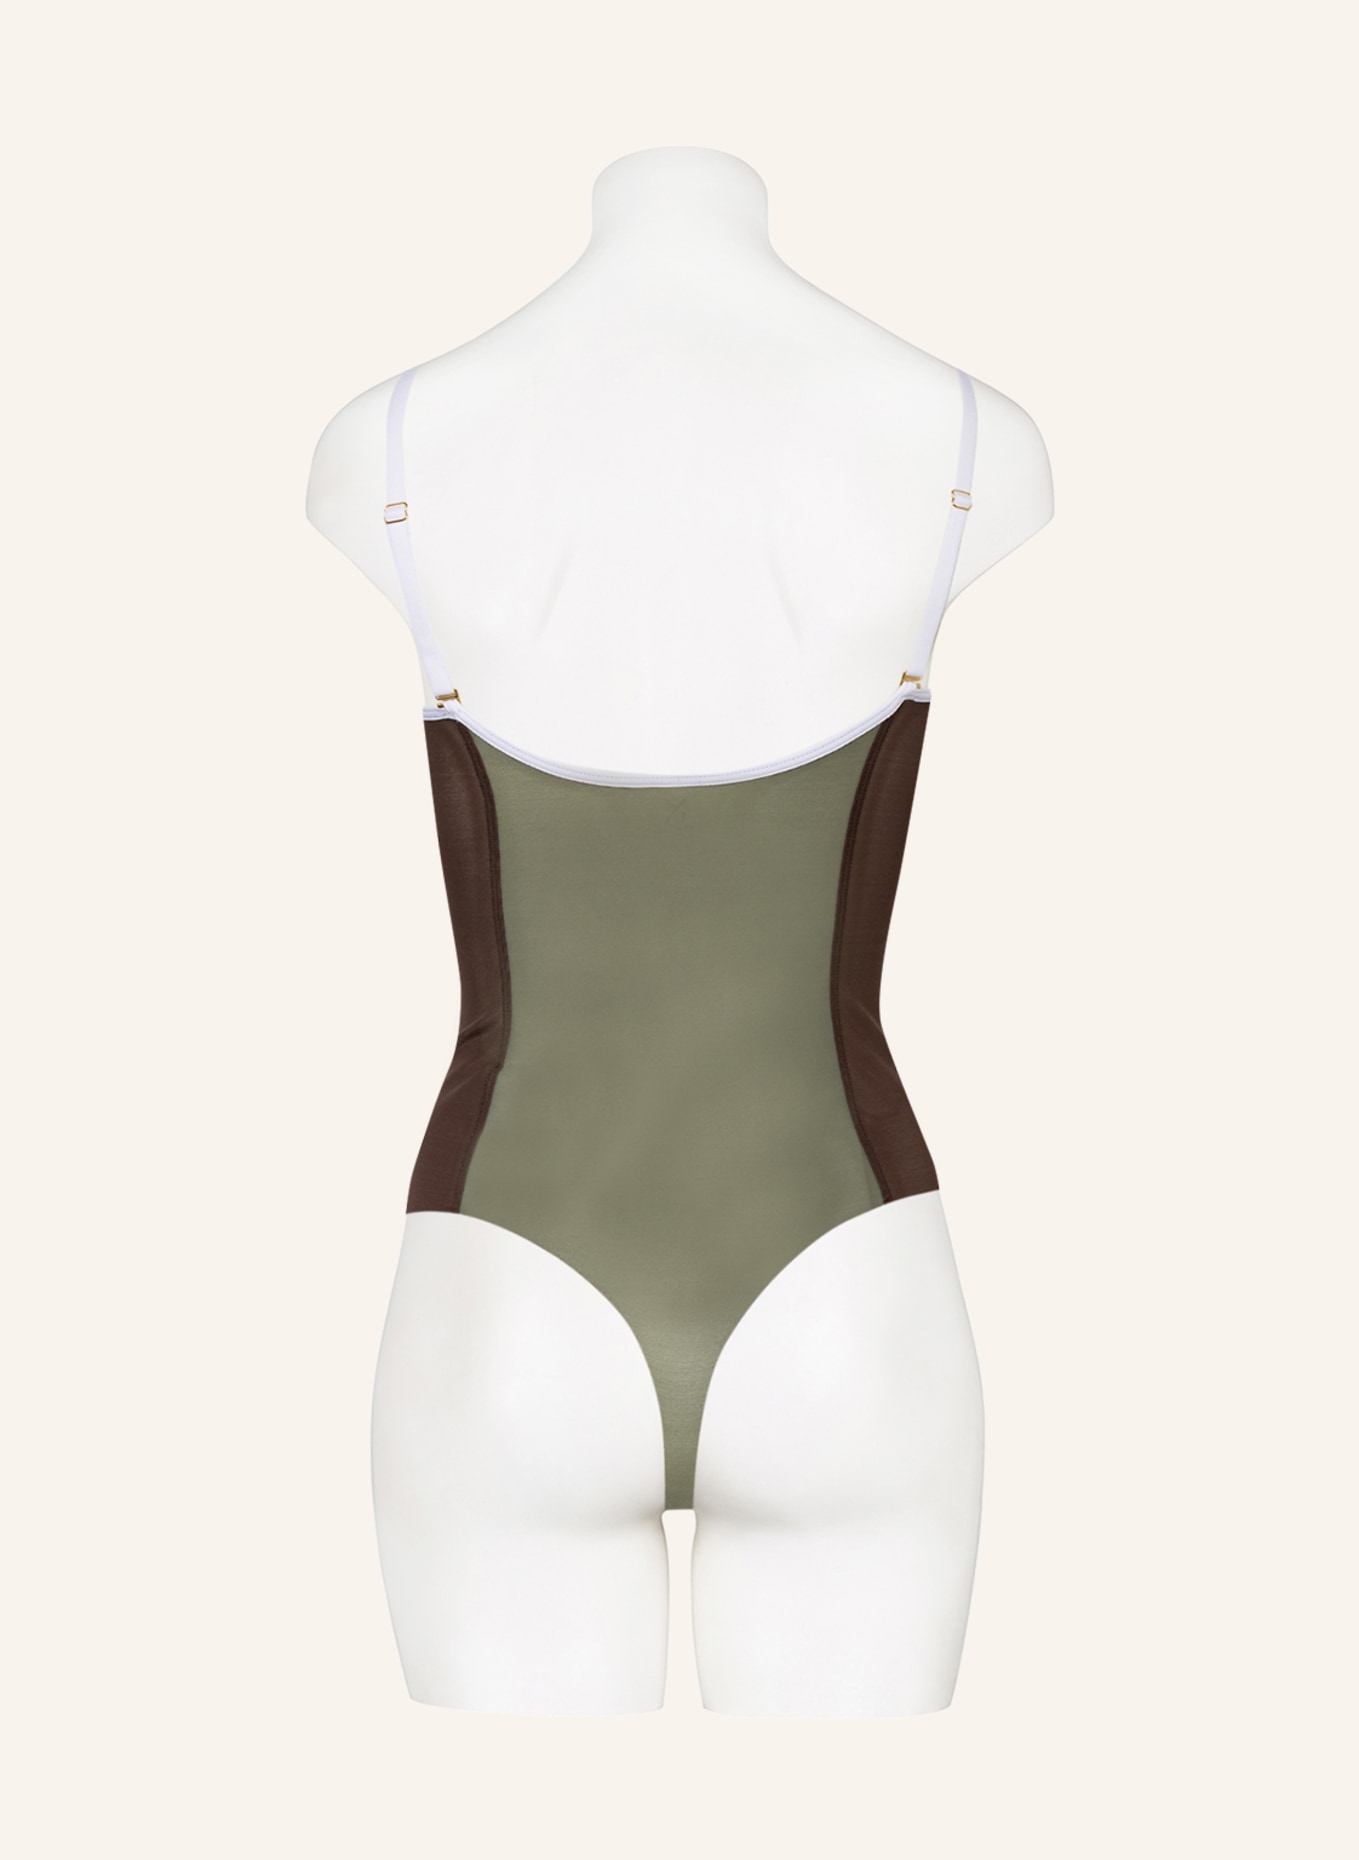 ITEM m6 Thong bodysuit ALL MESH with shaping effect, Color: OLIVE/ BROWN (Image 3)